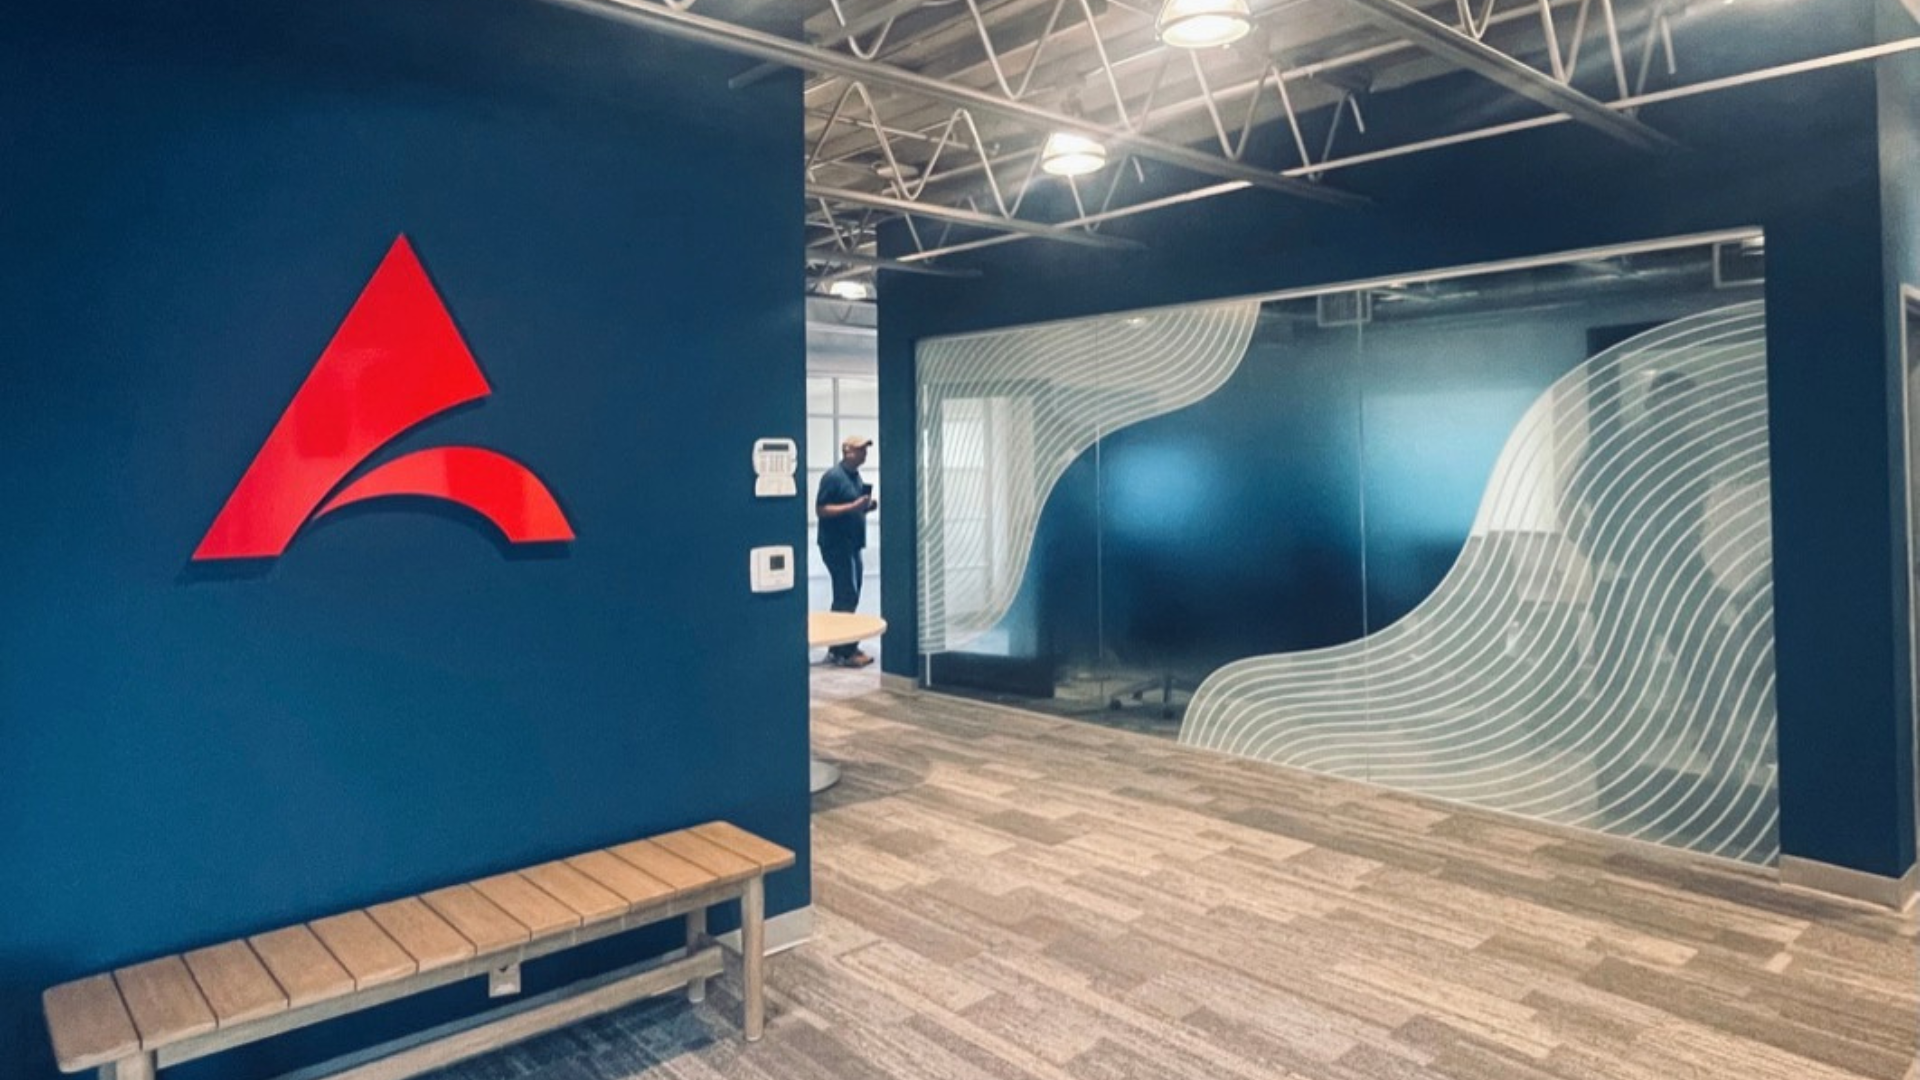 San Diego interior design of office space with red logo on blue wall, bench, flooring, blue and white wave design on conference room